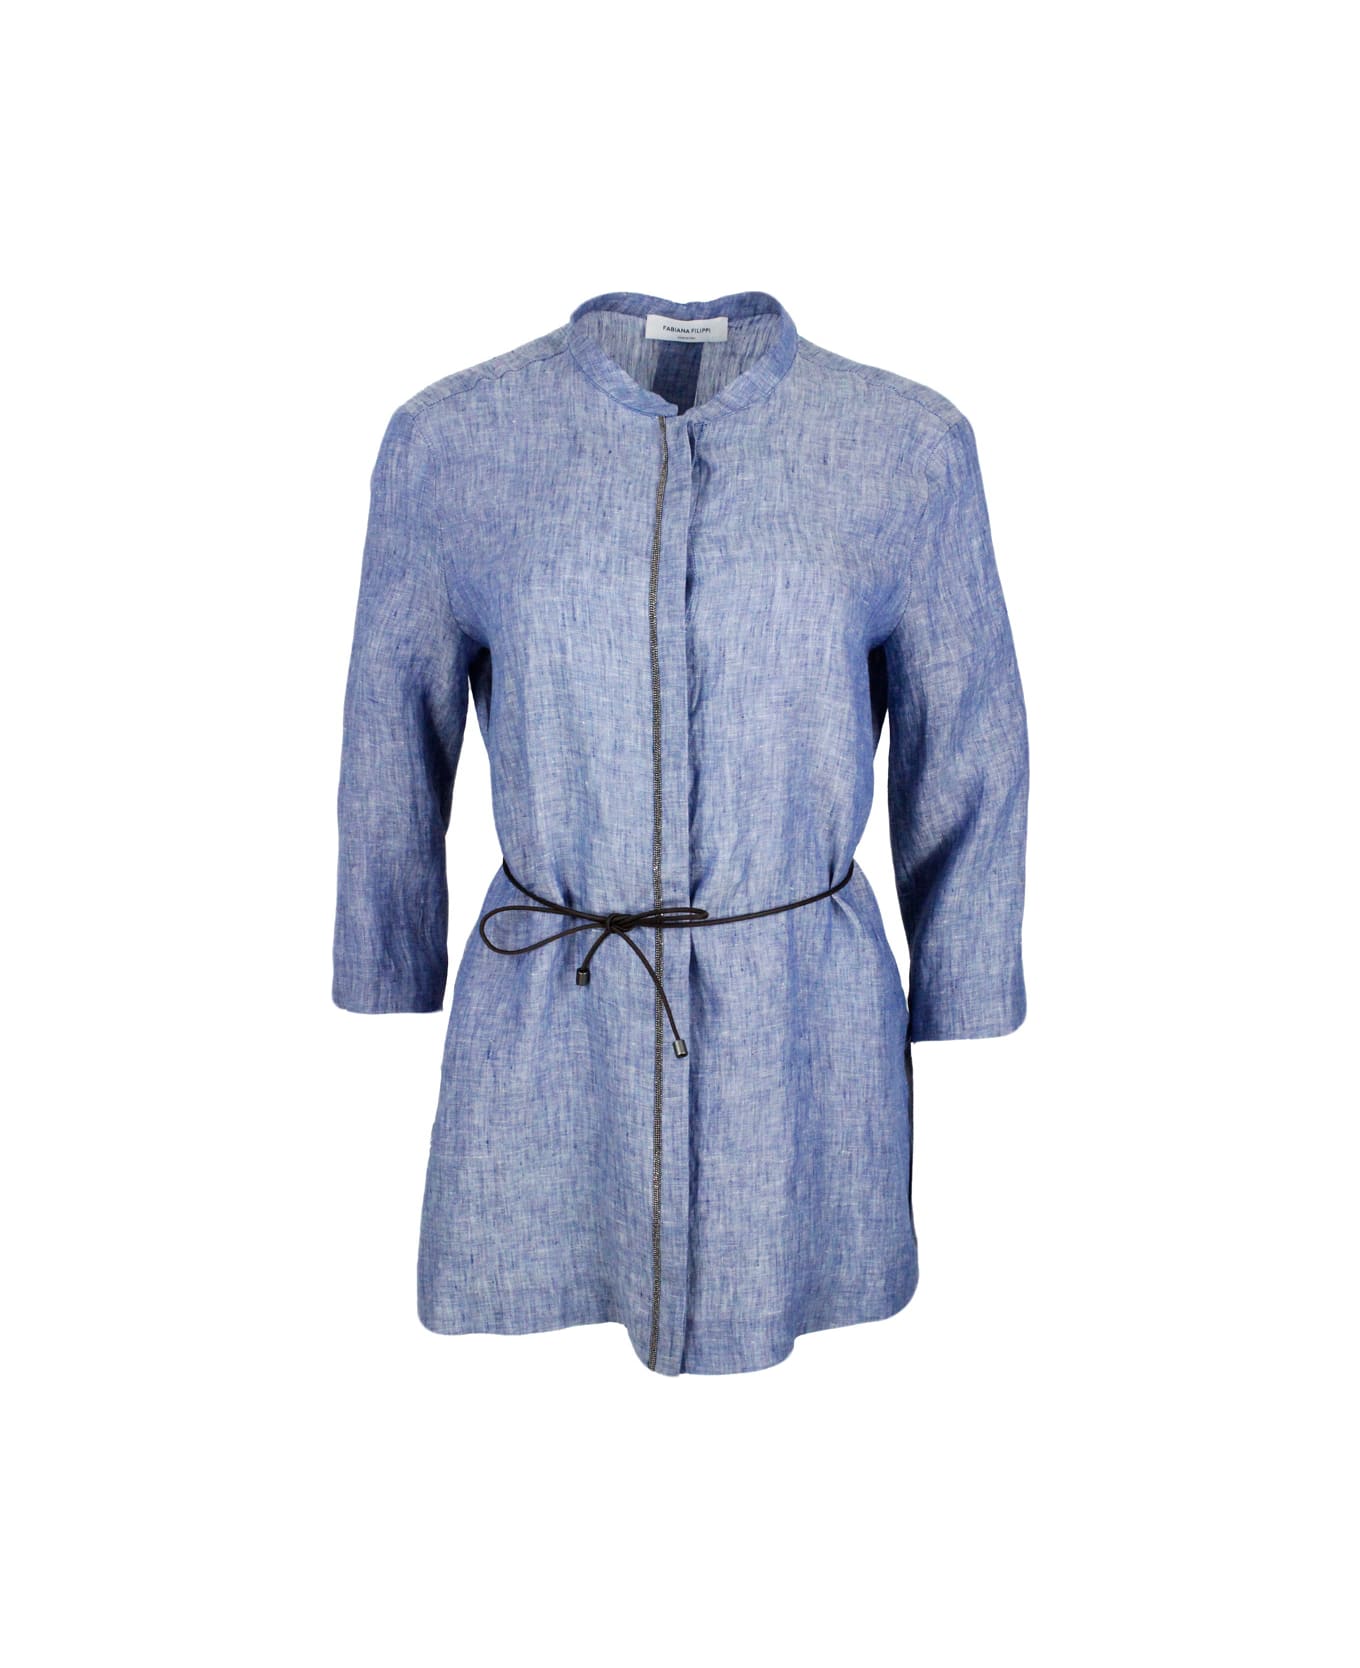 Fabiana Filippi Long Linen Shirt With Leather Belt And Embellished With Brilliant Jewels Along The Buttoning - BLUE JEANS